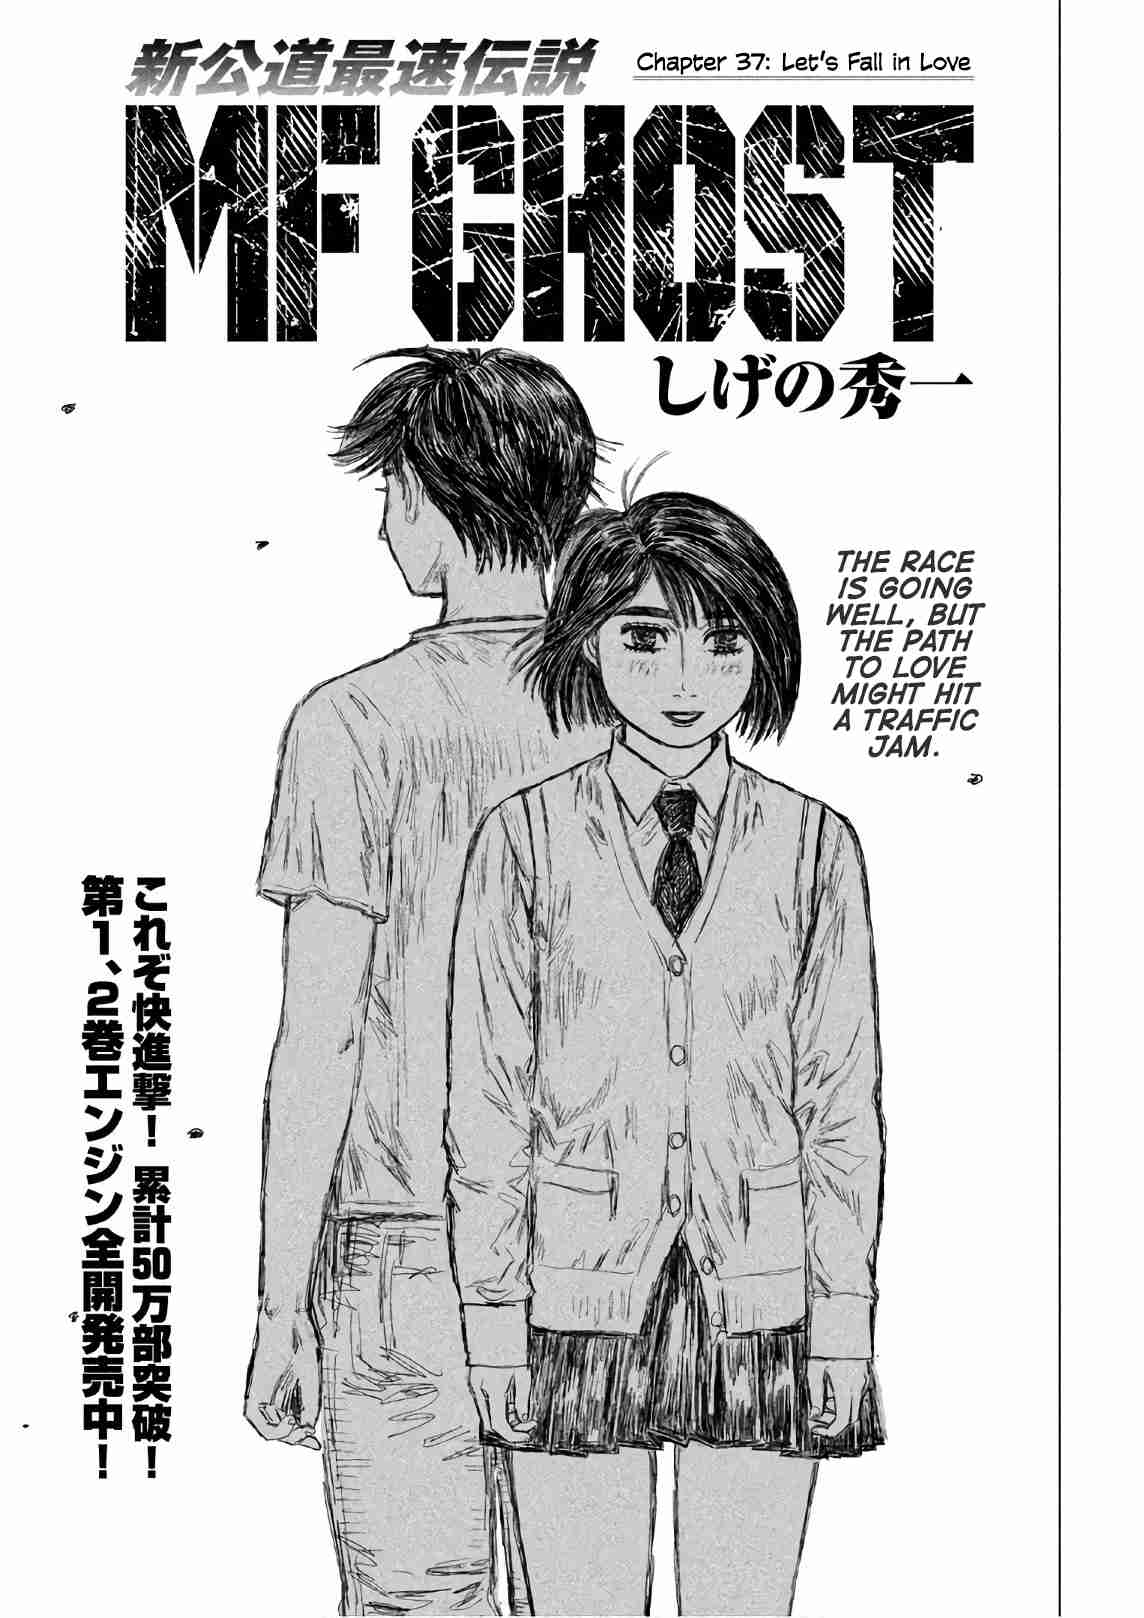 MF Ghost Vol. 3 Ch. 37 Let's Fall in Love